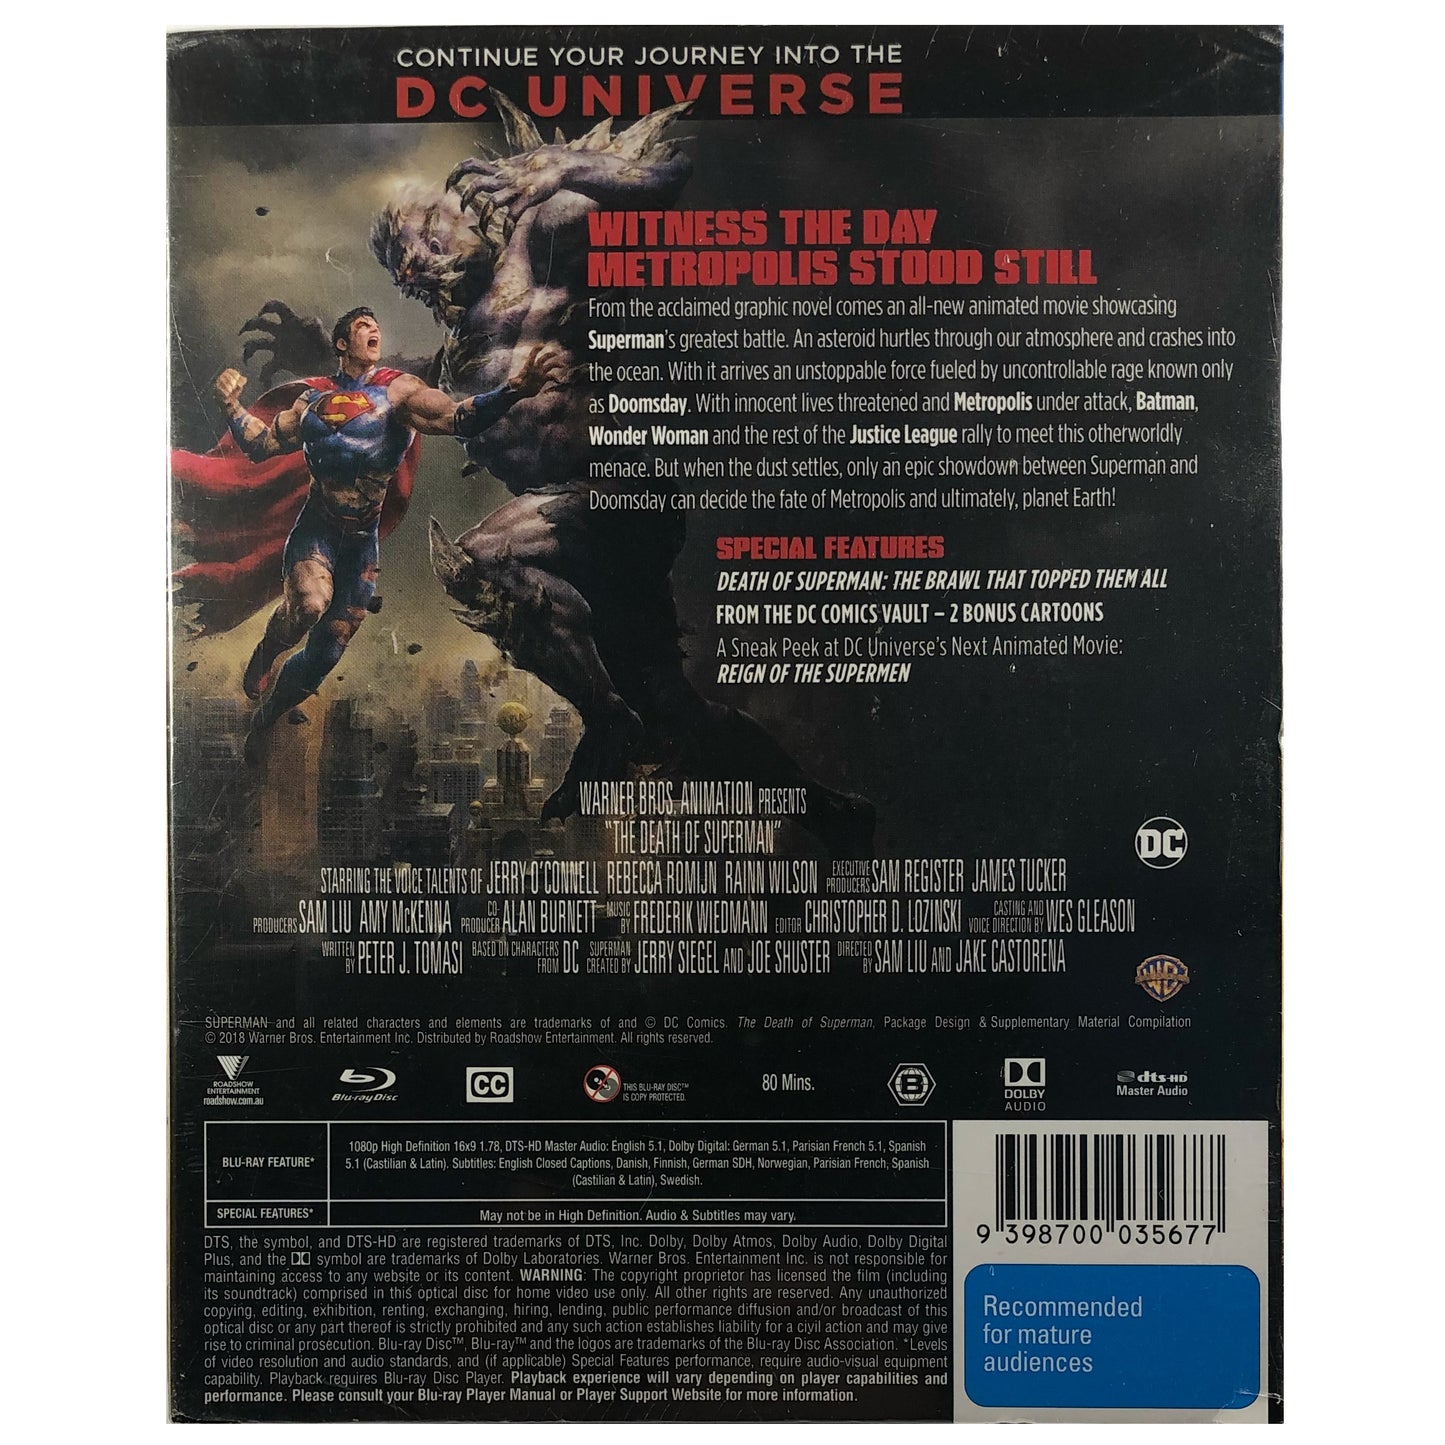 The Death of Superman Limited Edition Blu-Ray Gift Set